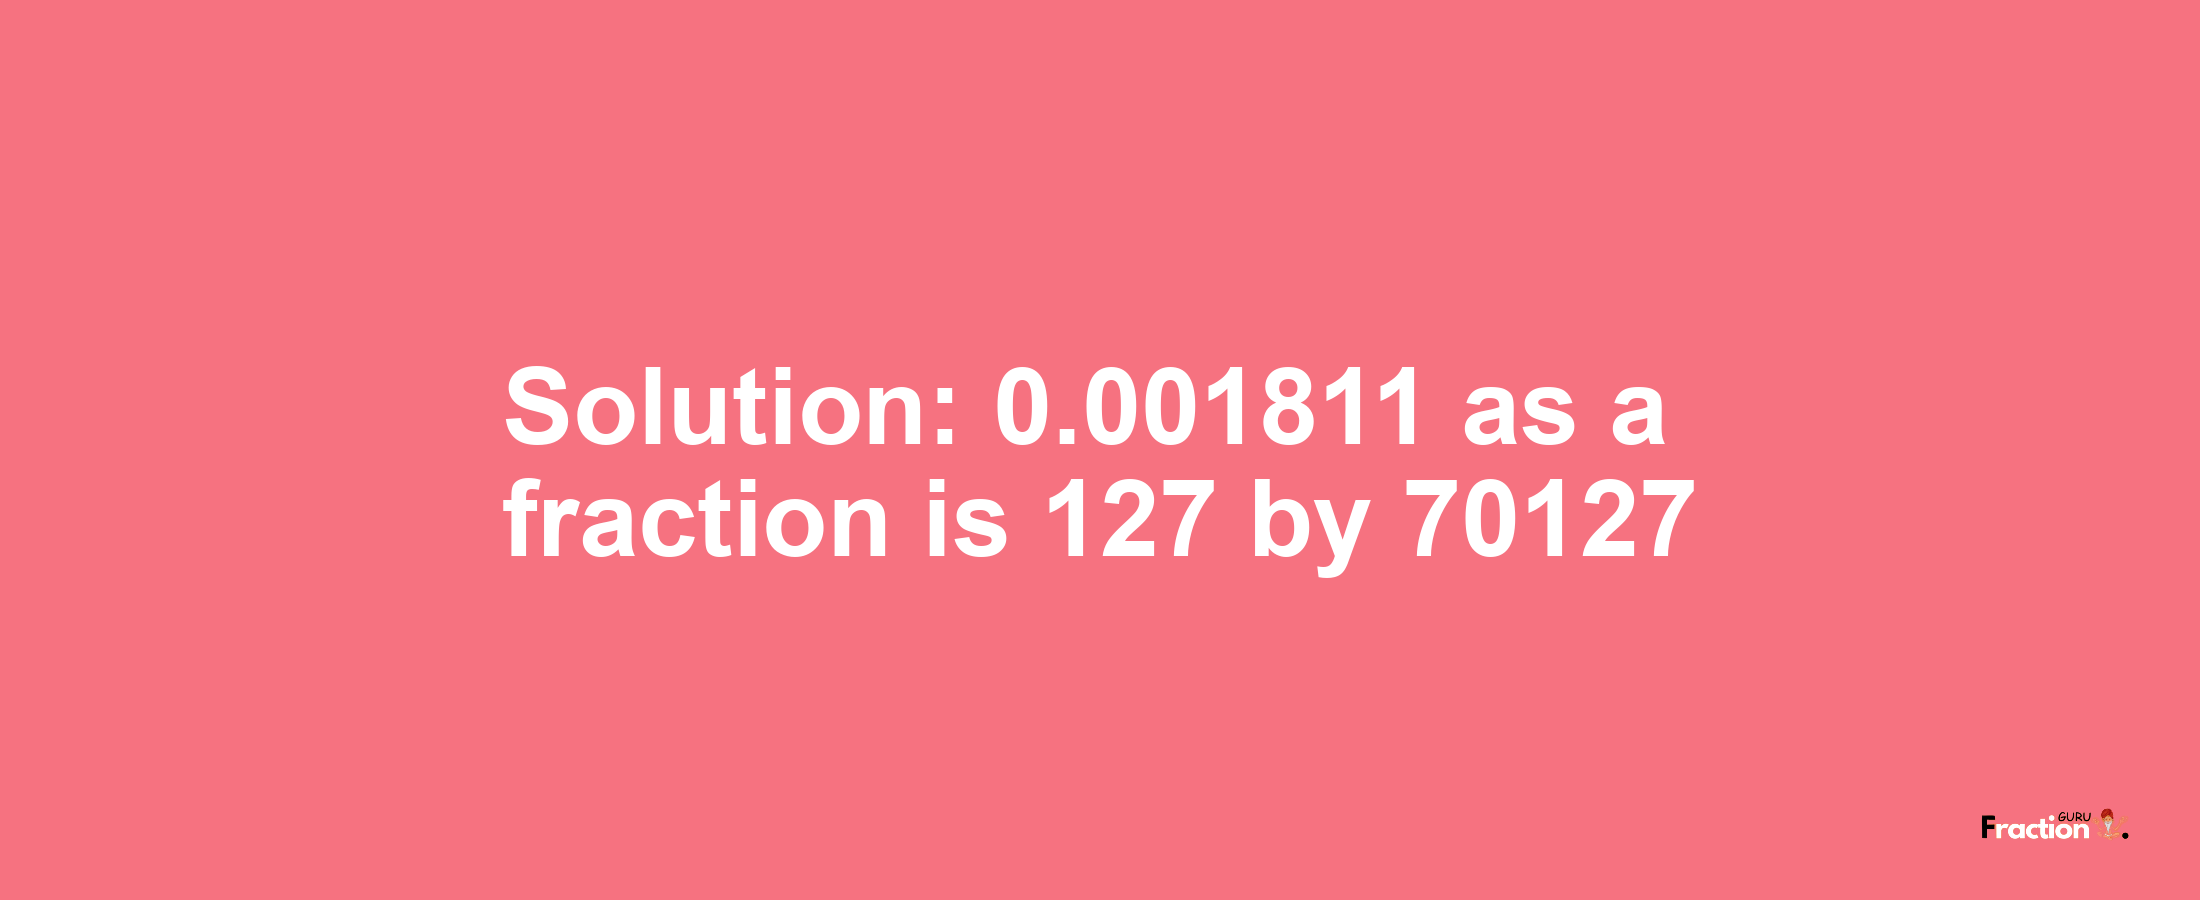 Solution:0.001811 as a fraction is 127/70127